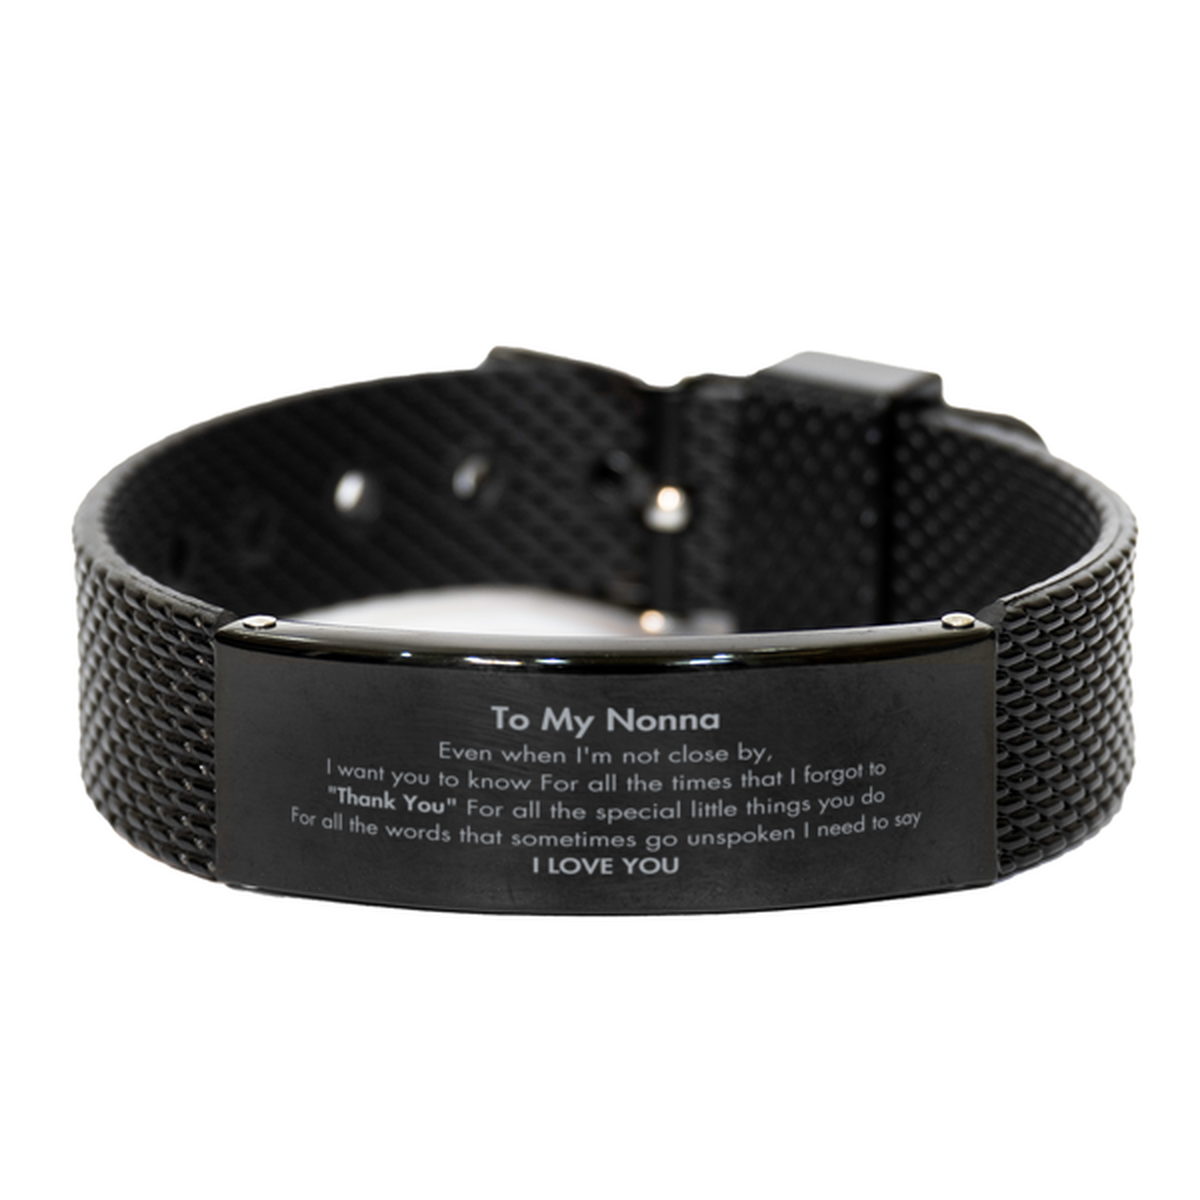 Thank You Gifts for Nonna, Keepsake Black Shark Mesh Bracelet Gifts for Nonna Birthday Mother's day Father's Day Nonna For all the words That sometimes go unspoken I need to say I LOVE YOU